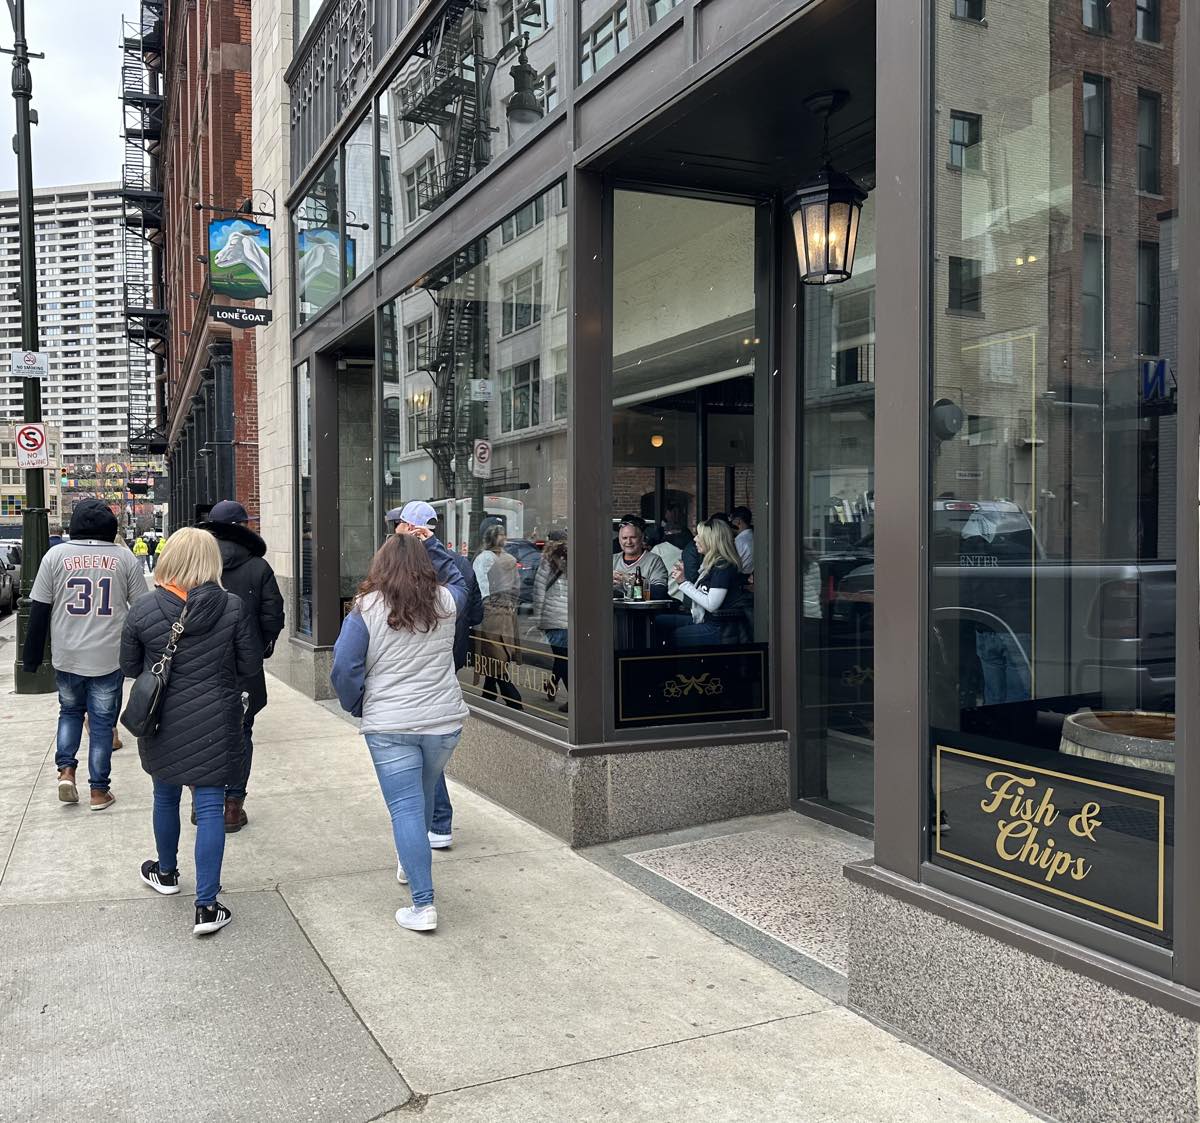 Look inside the new Qargo Coffee coming to Detroit's Midtown